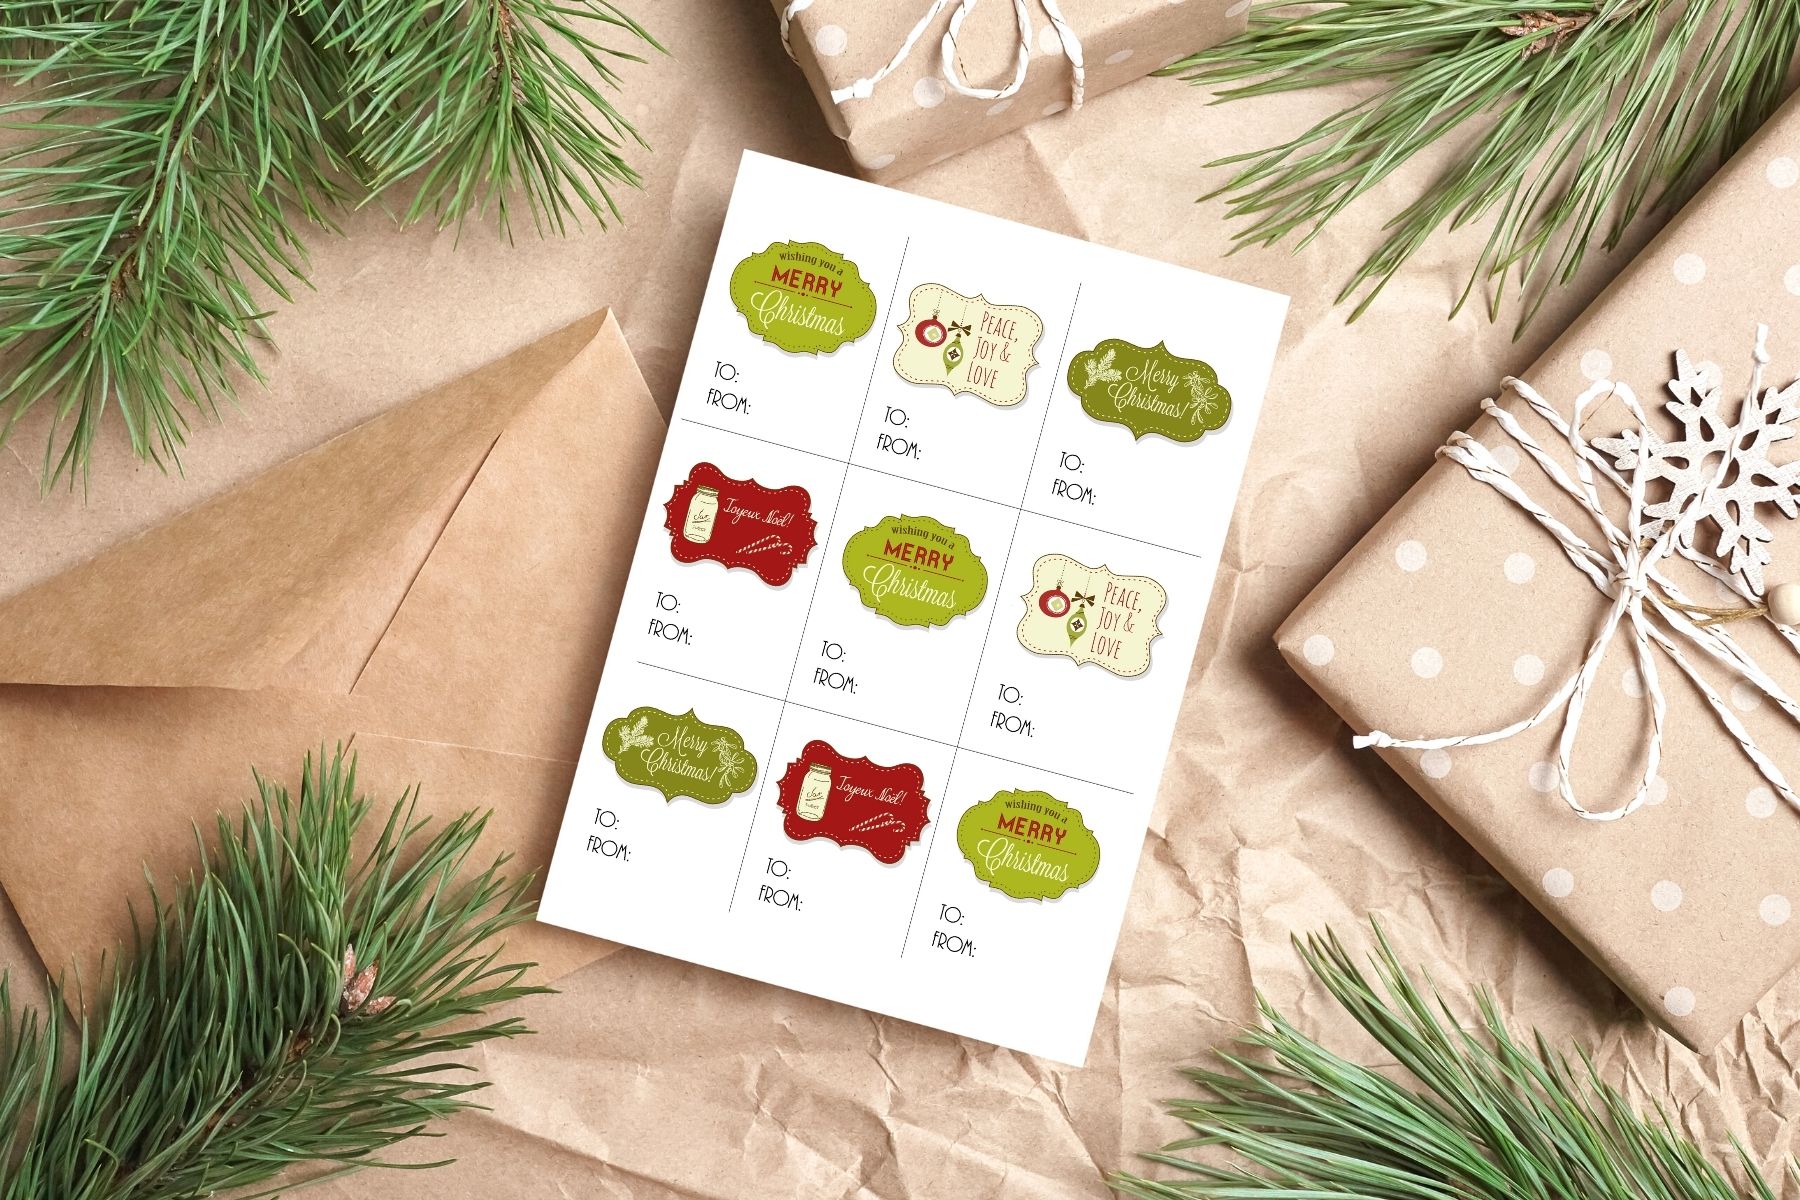 Christmas Gift Labels Free Printable Stickers for Cricut